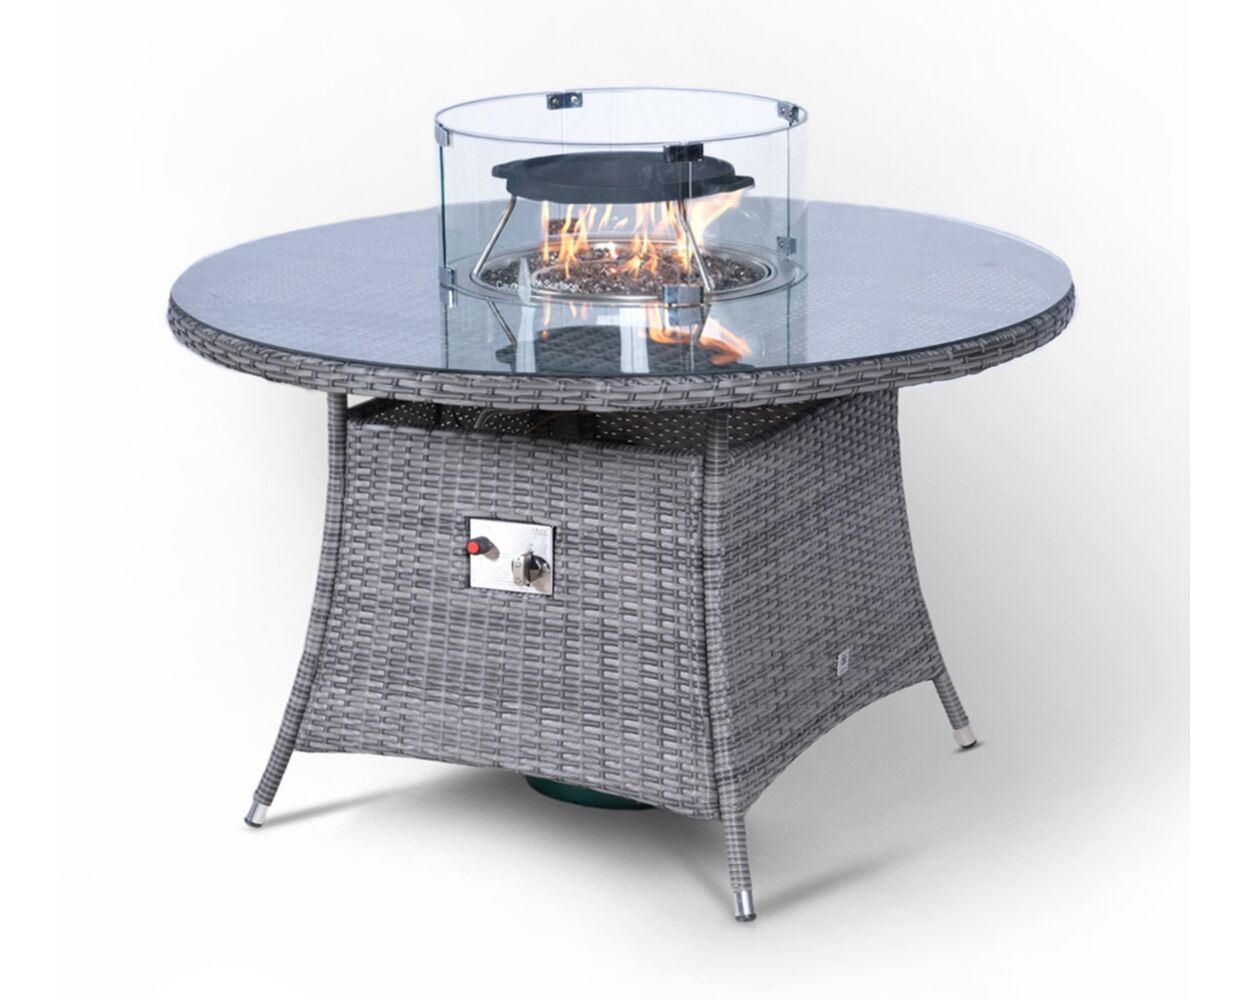 Giardino Round 4 Seater Rattan Patio Dining Table with Firepit - Grey